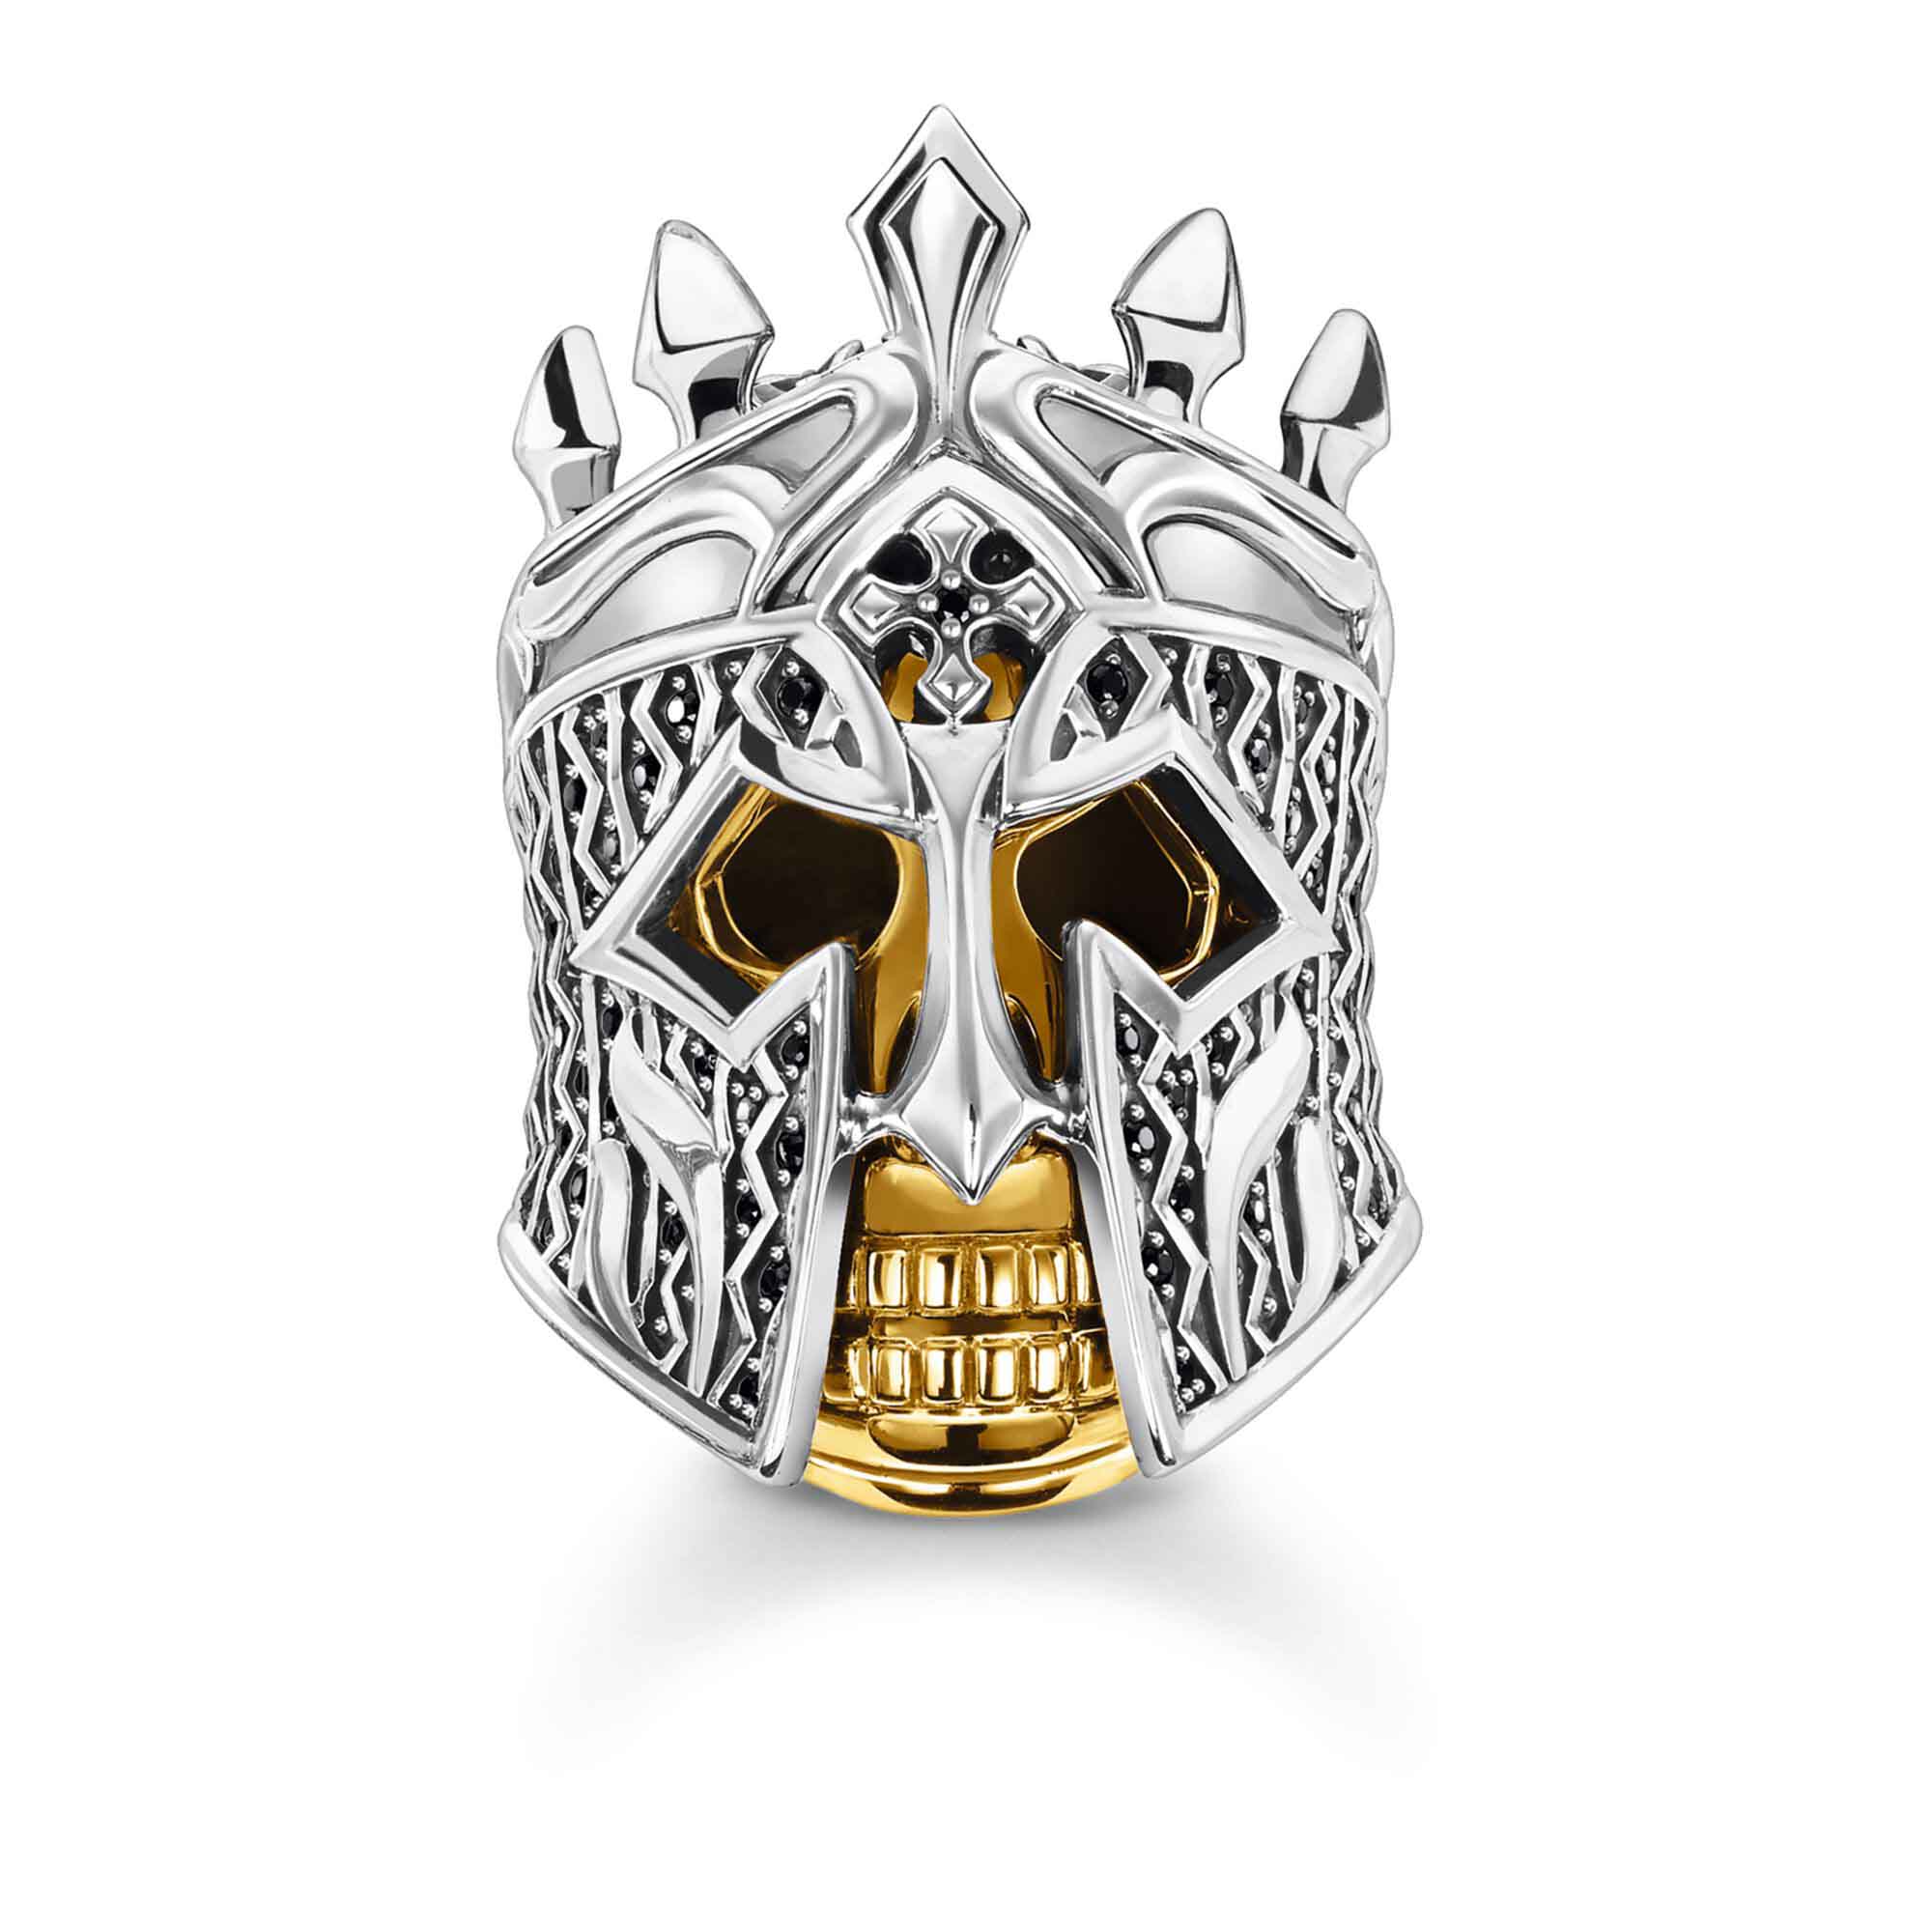 Wholesale Custom mens OEM/ODM Jewelry Skull ring made of blackened 925 Sterling silver with yellow-gold plating OEM